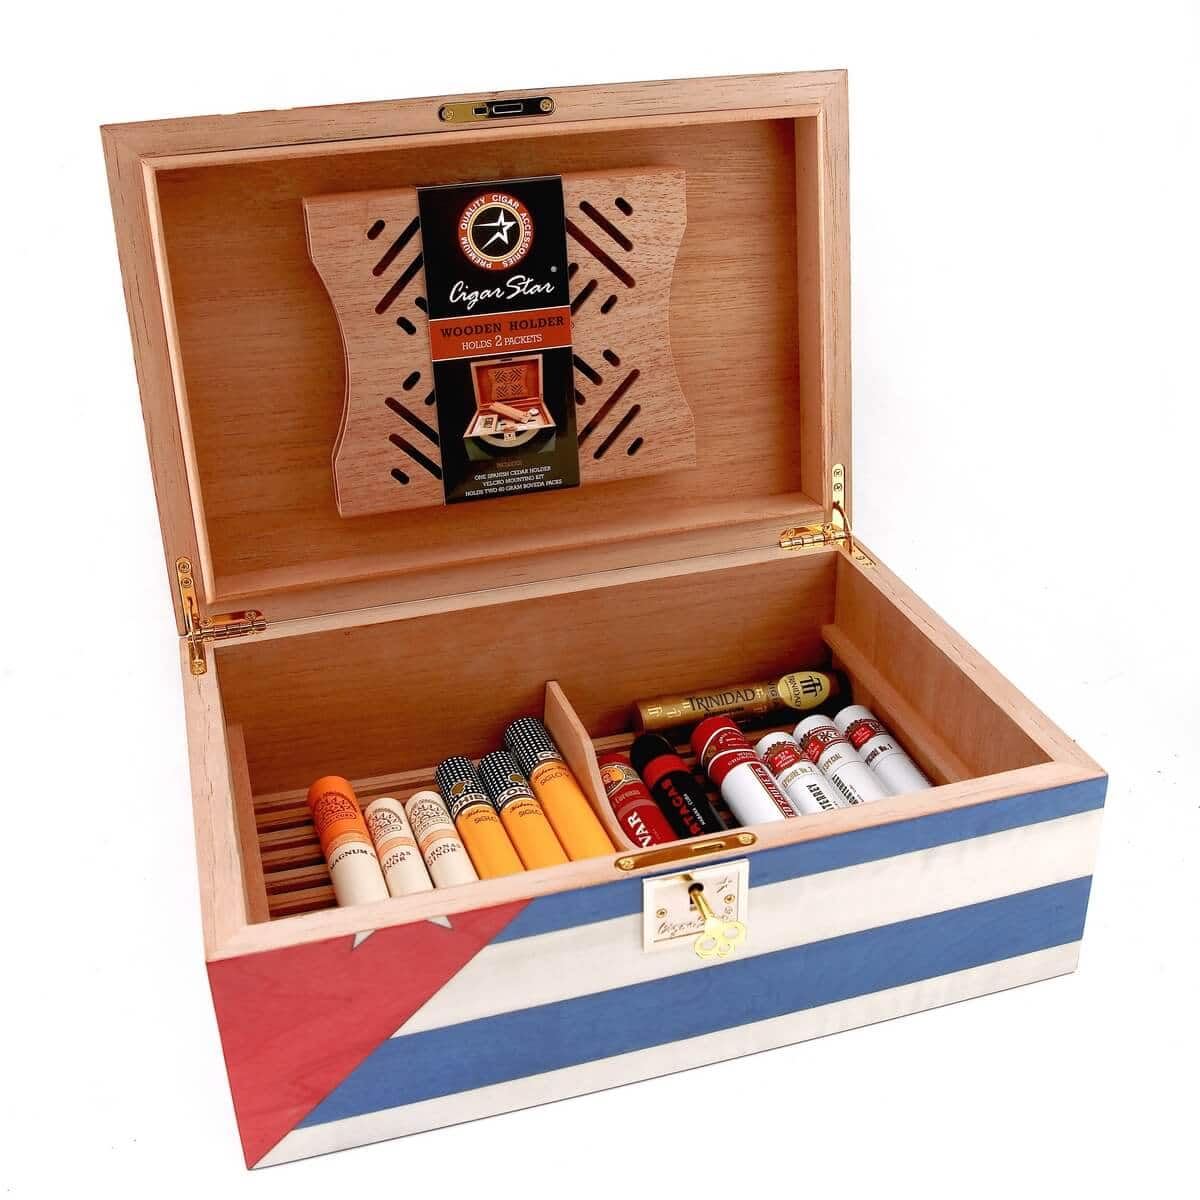 Humidors for Cigars, What you need to know.